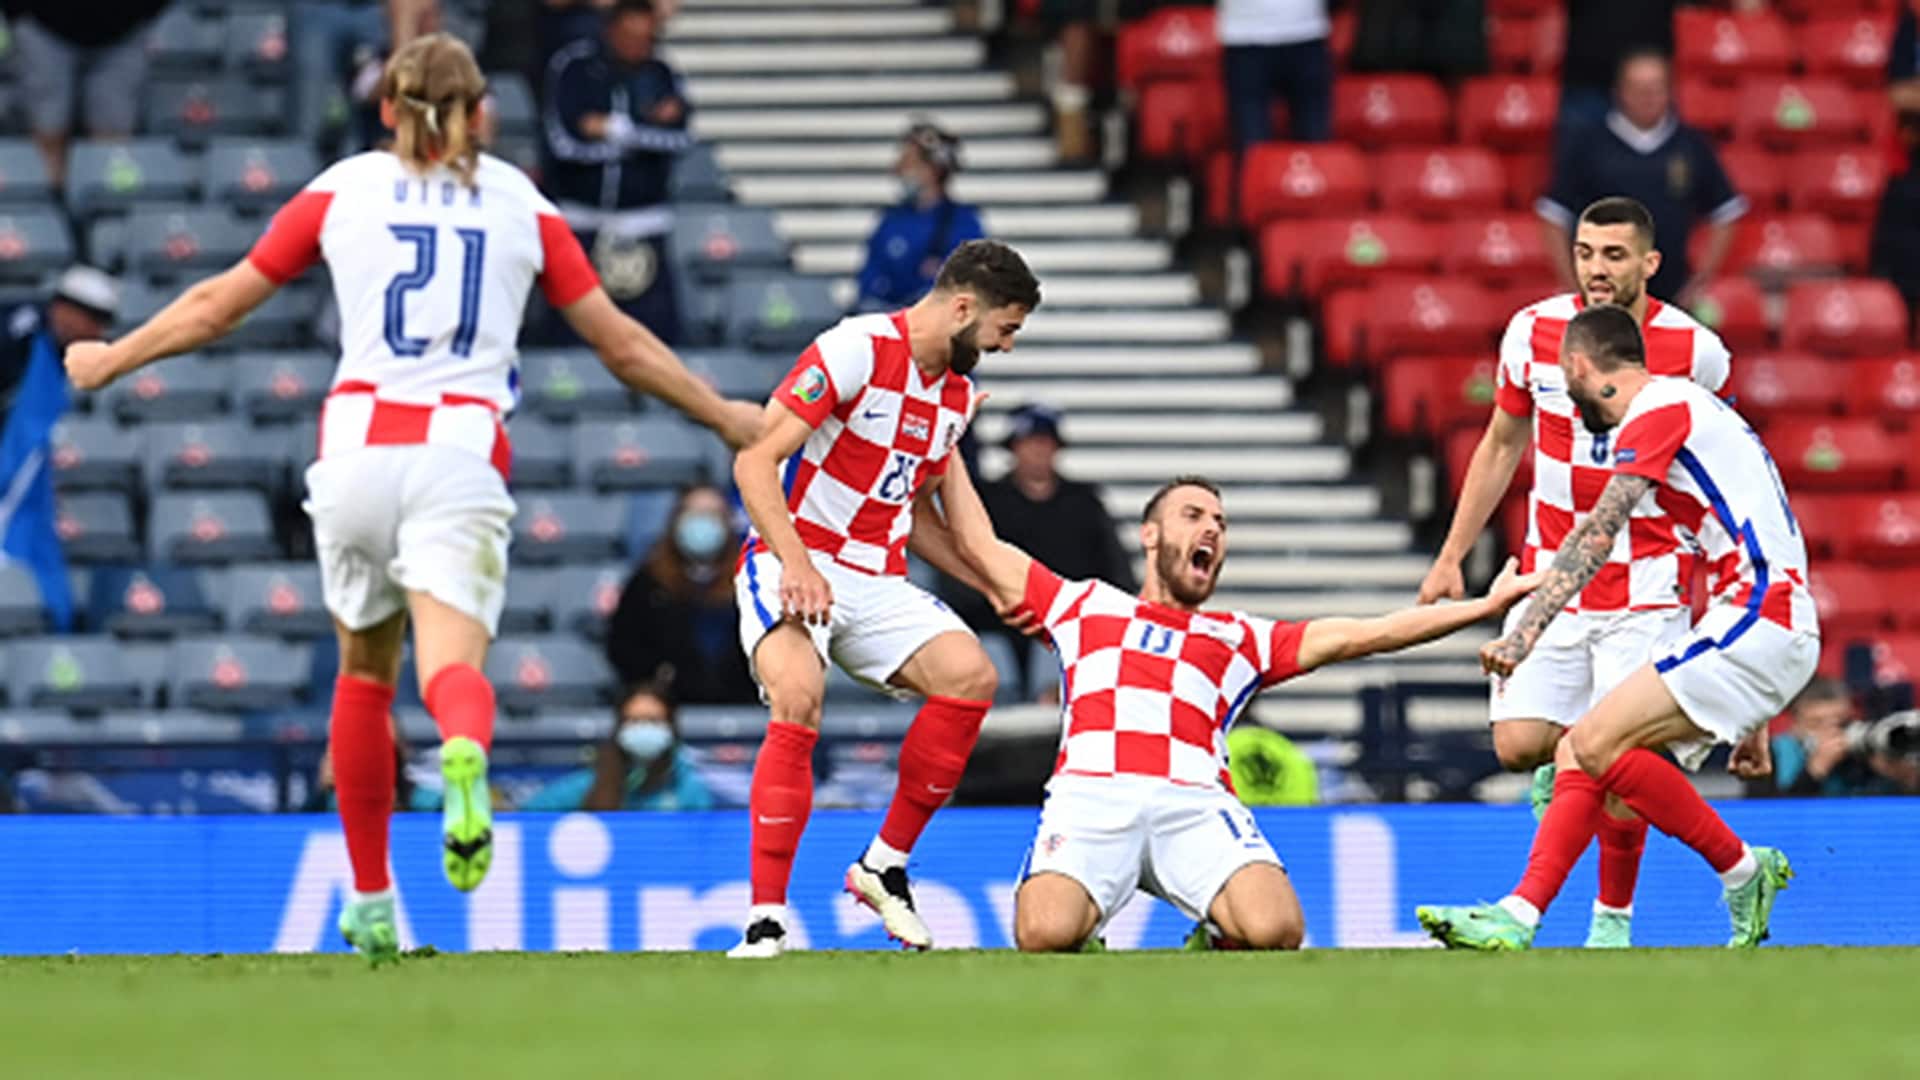 Vlasic makes Croatia's first shot on target count with opening goal vs